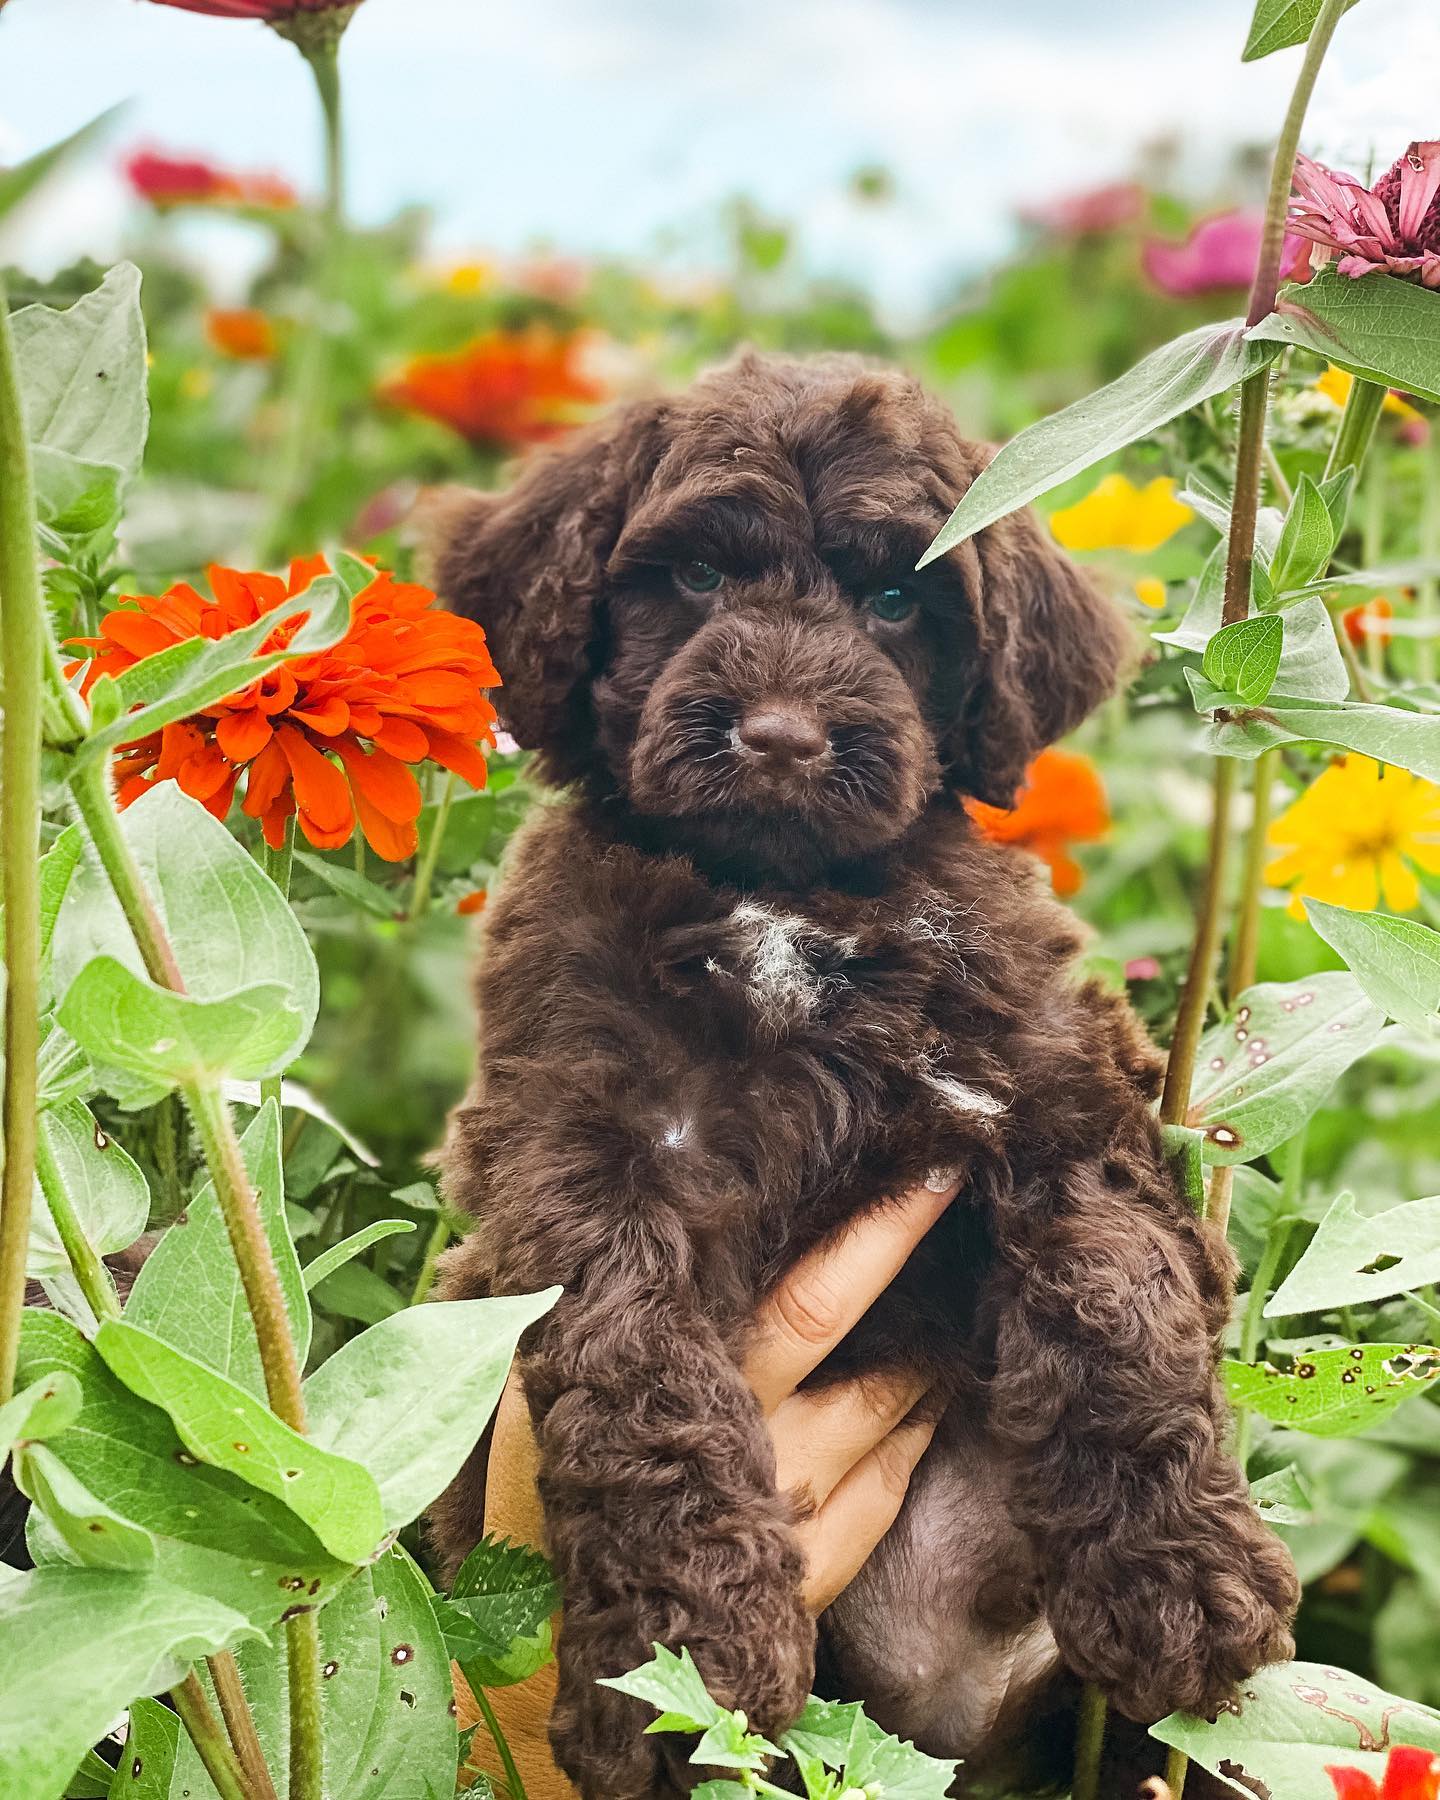 Chocolate Goldendoodle, Schnoodle, and Twoodle pictures